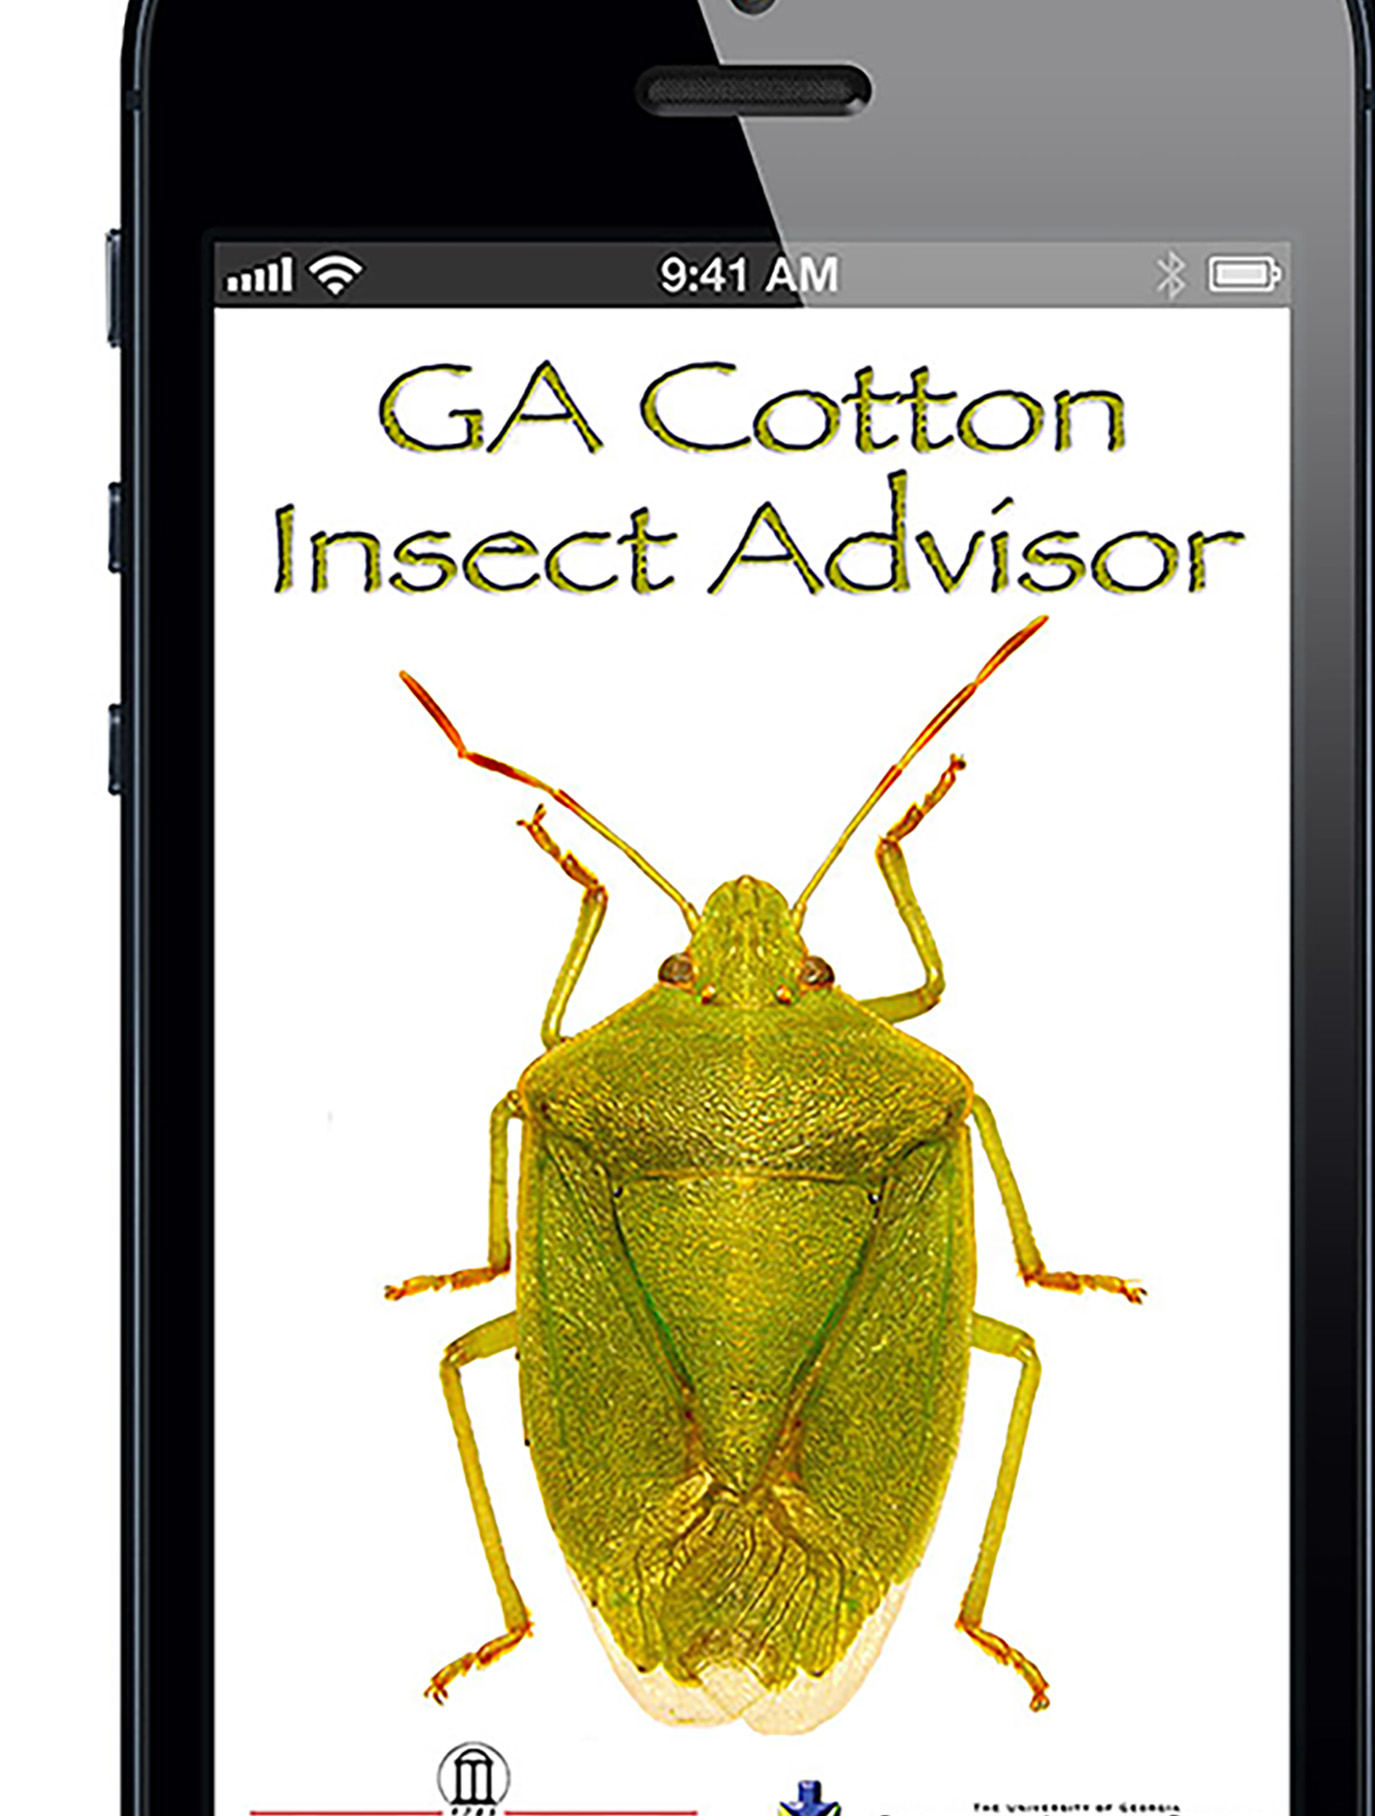 A new app has been developed to better treat and manage stink bugs in cotton.